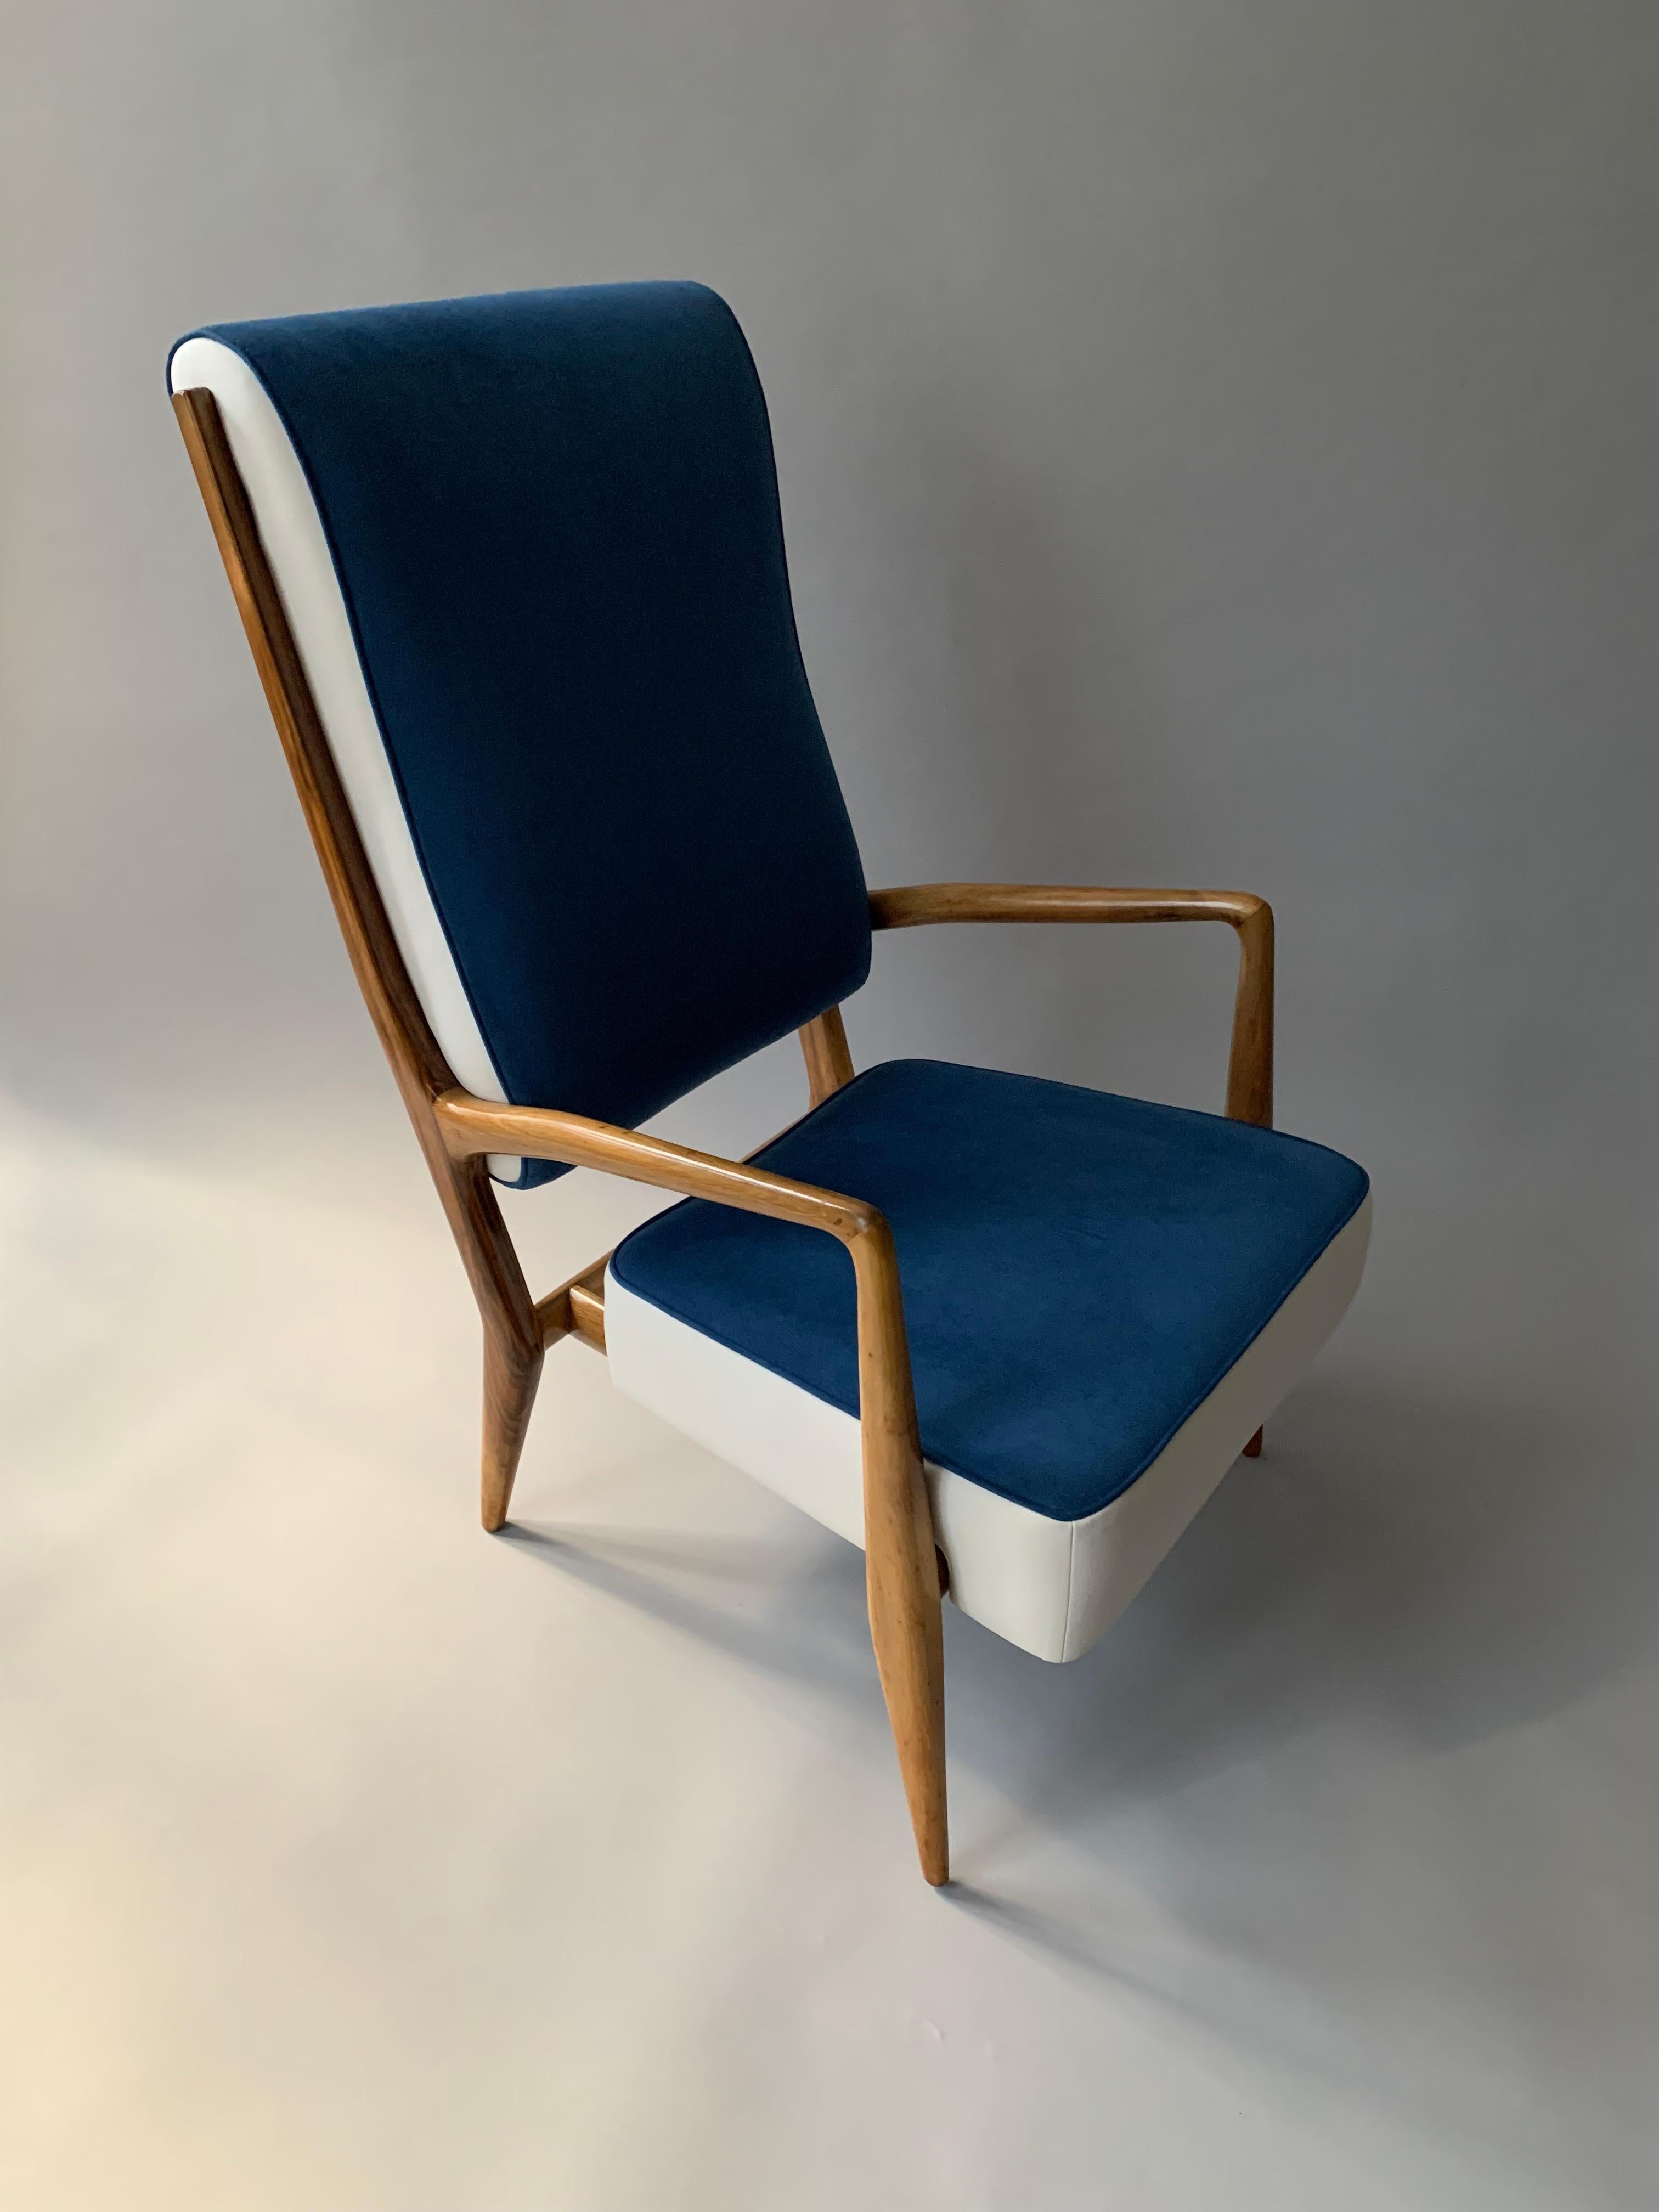 A rare Gio Ponti armchair

Made by Cassina 
Model #589

Italian

Walnut

1955

Documented and letter of authenticity available upon request.

